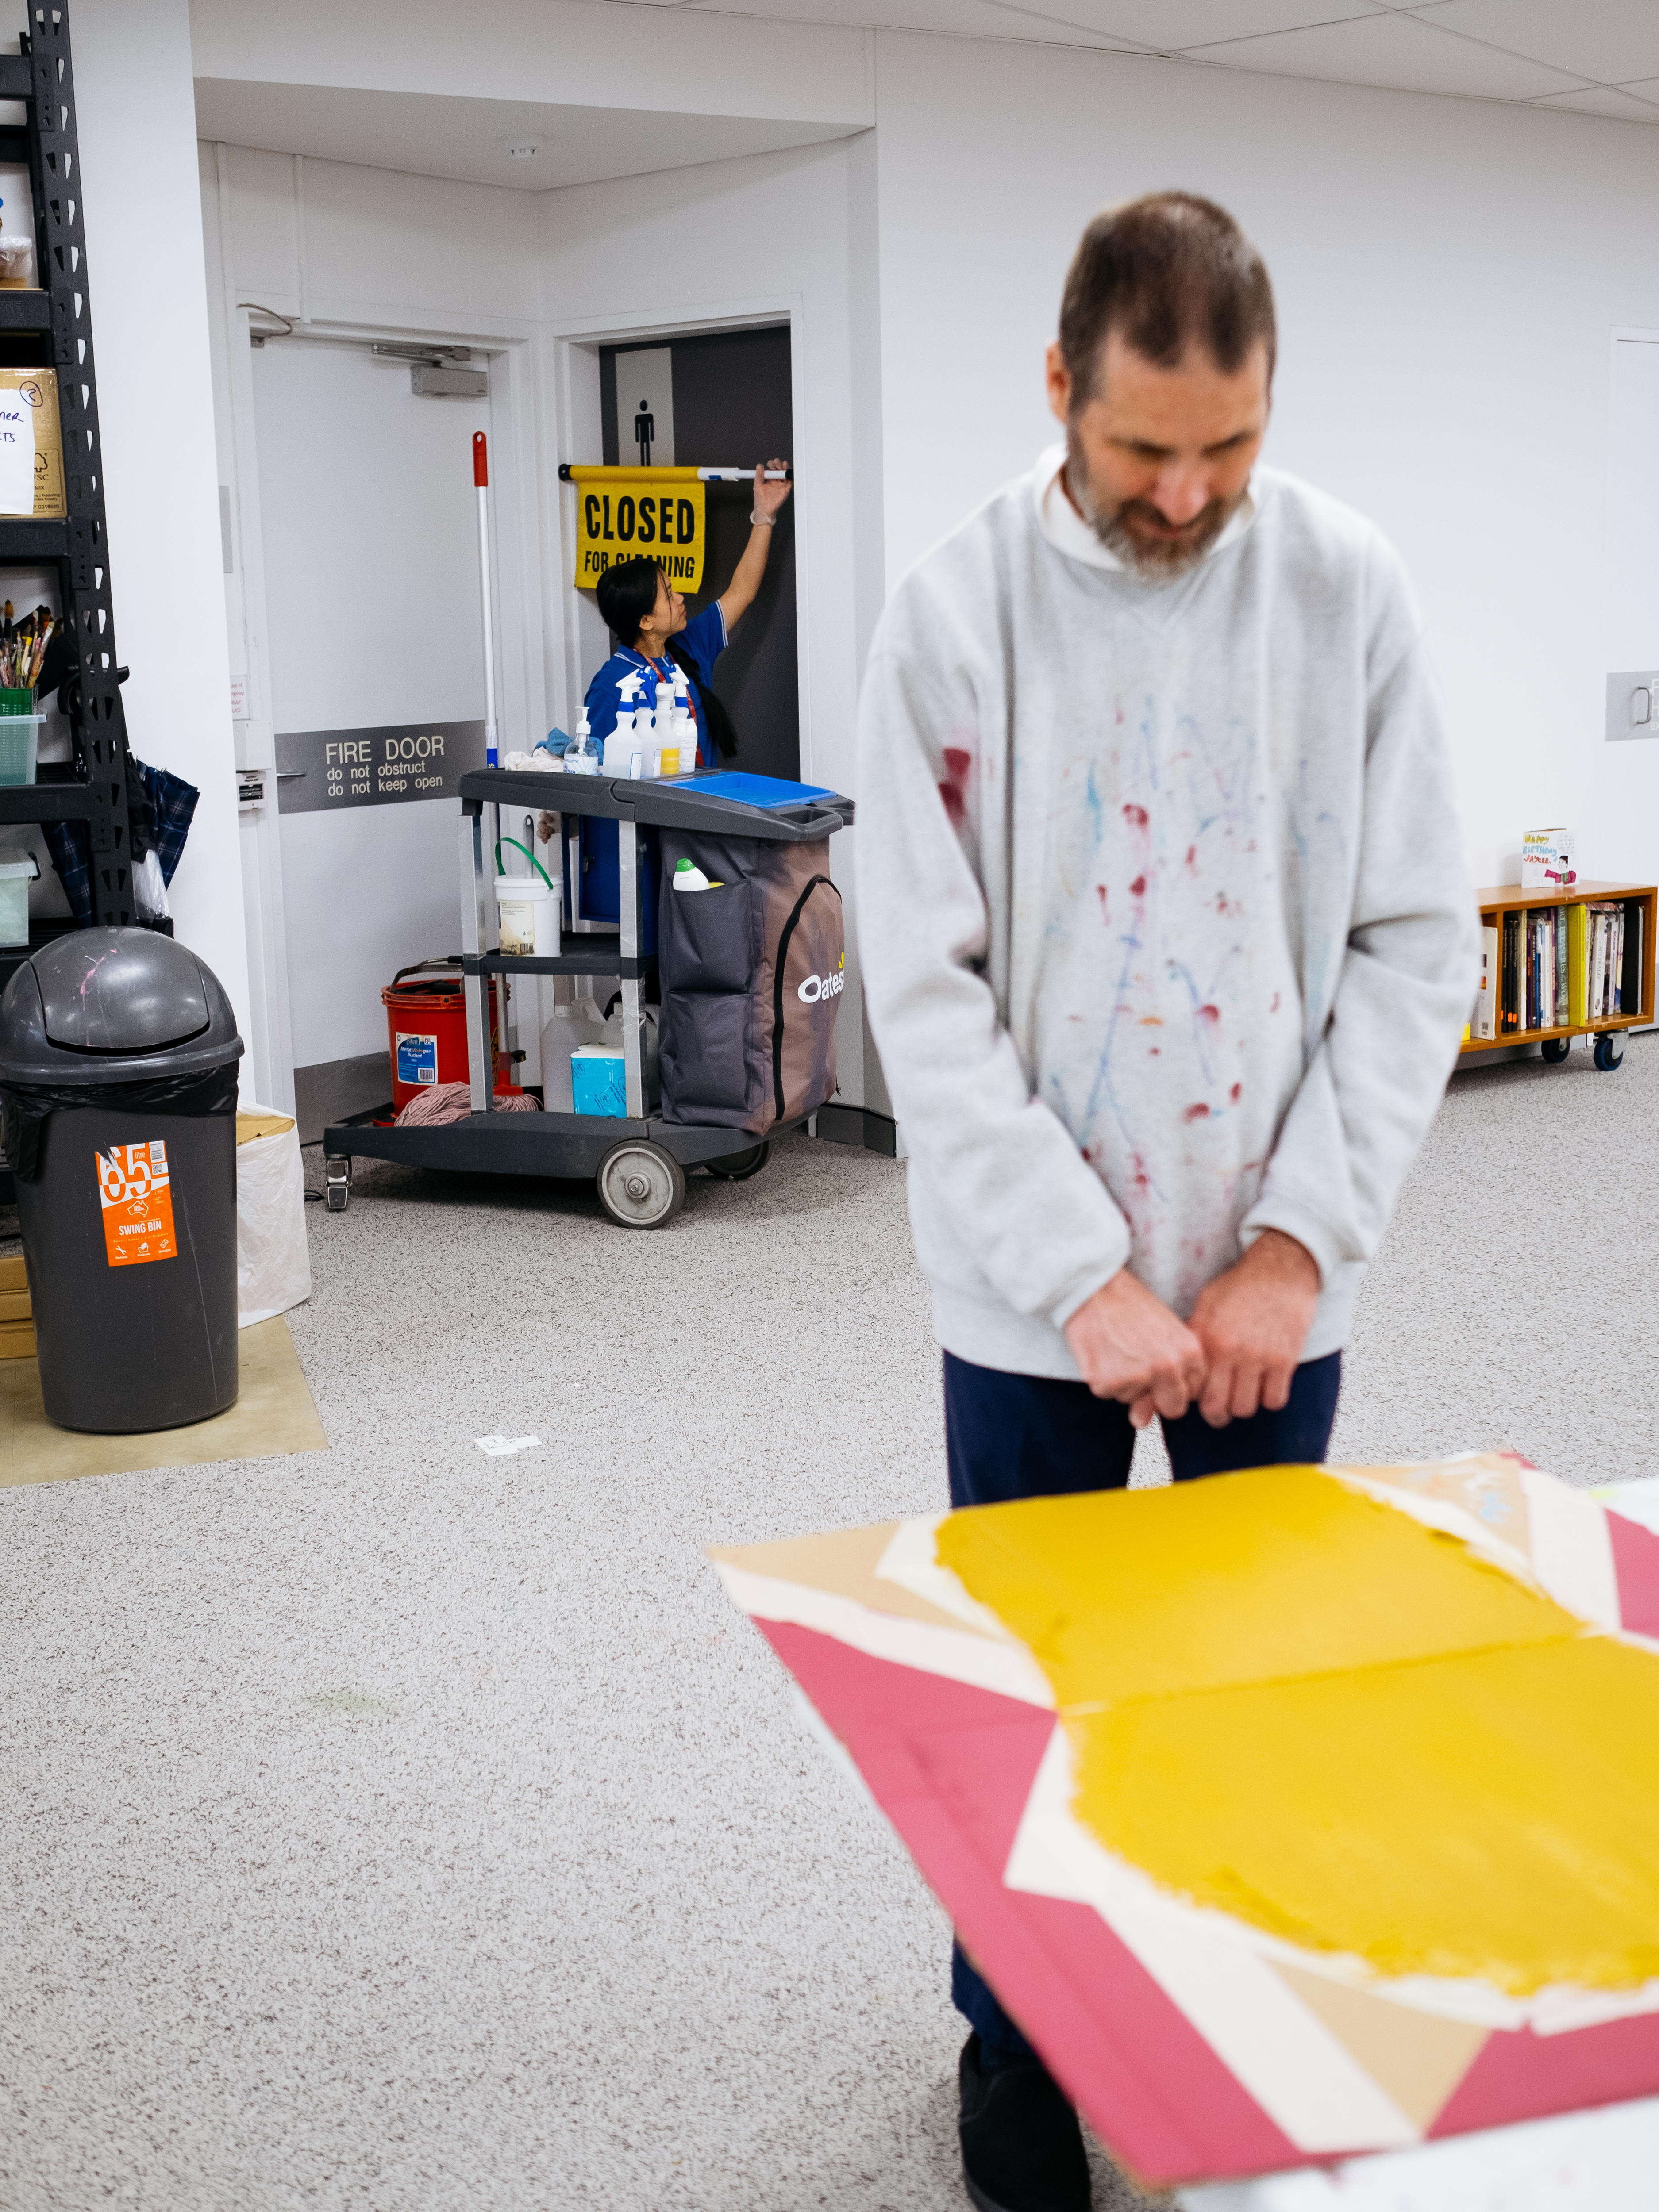 Artist Thom painting at a table in a grey jumper, with cleaner Subita and her trolley leaving the bathrooms in the background